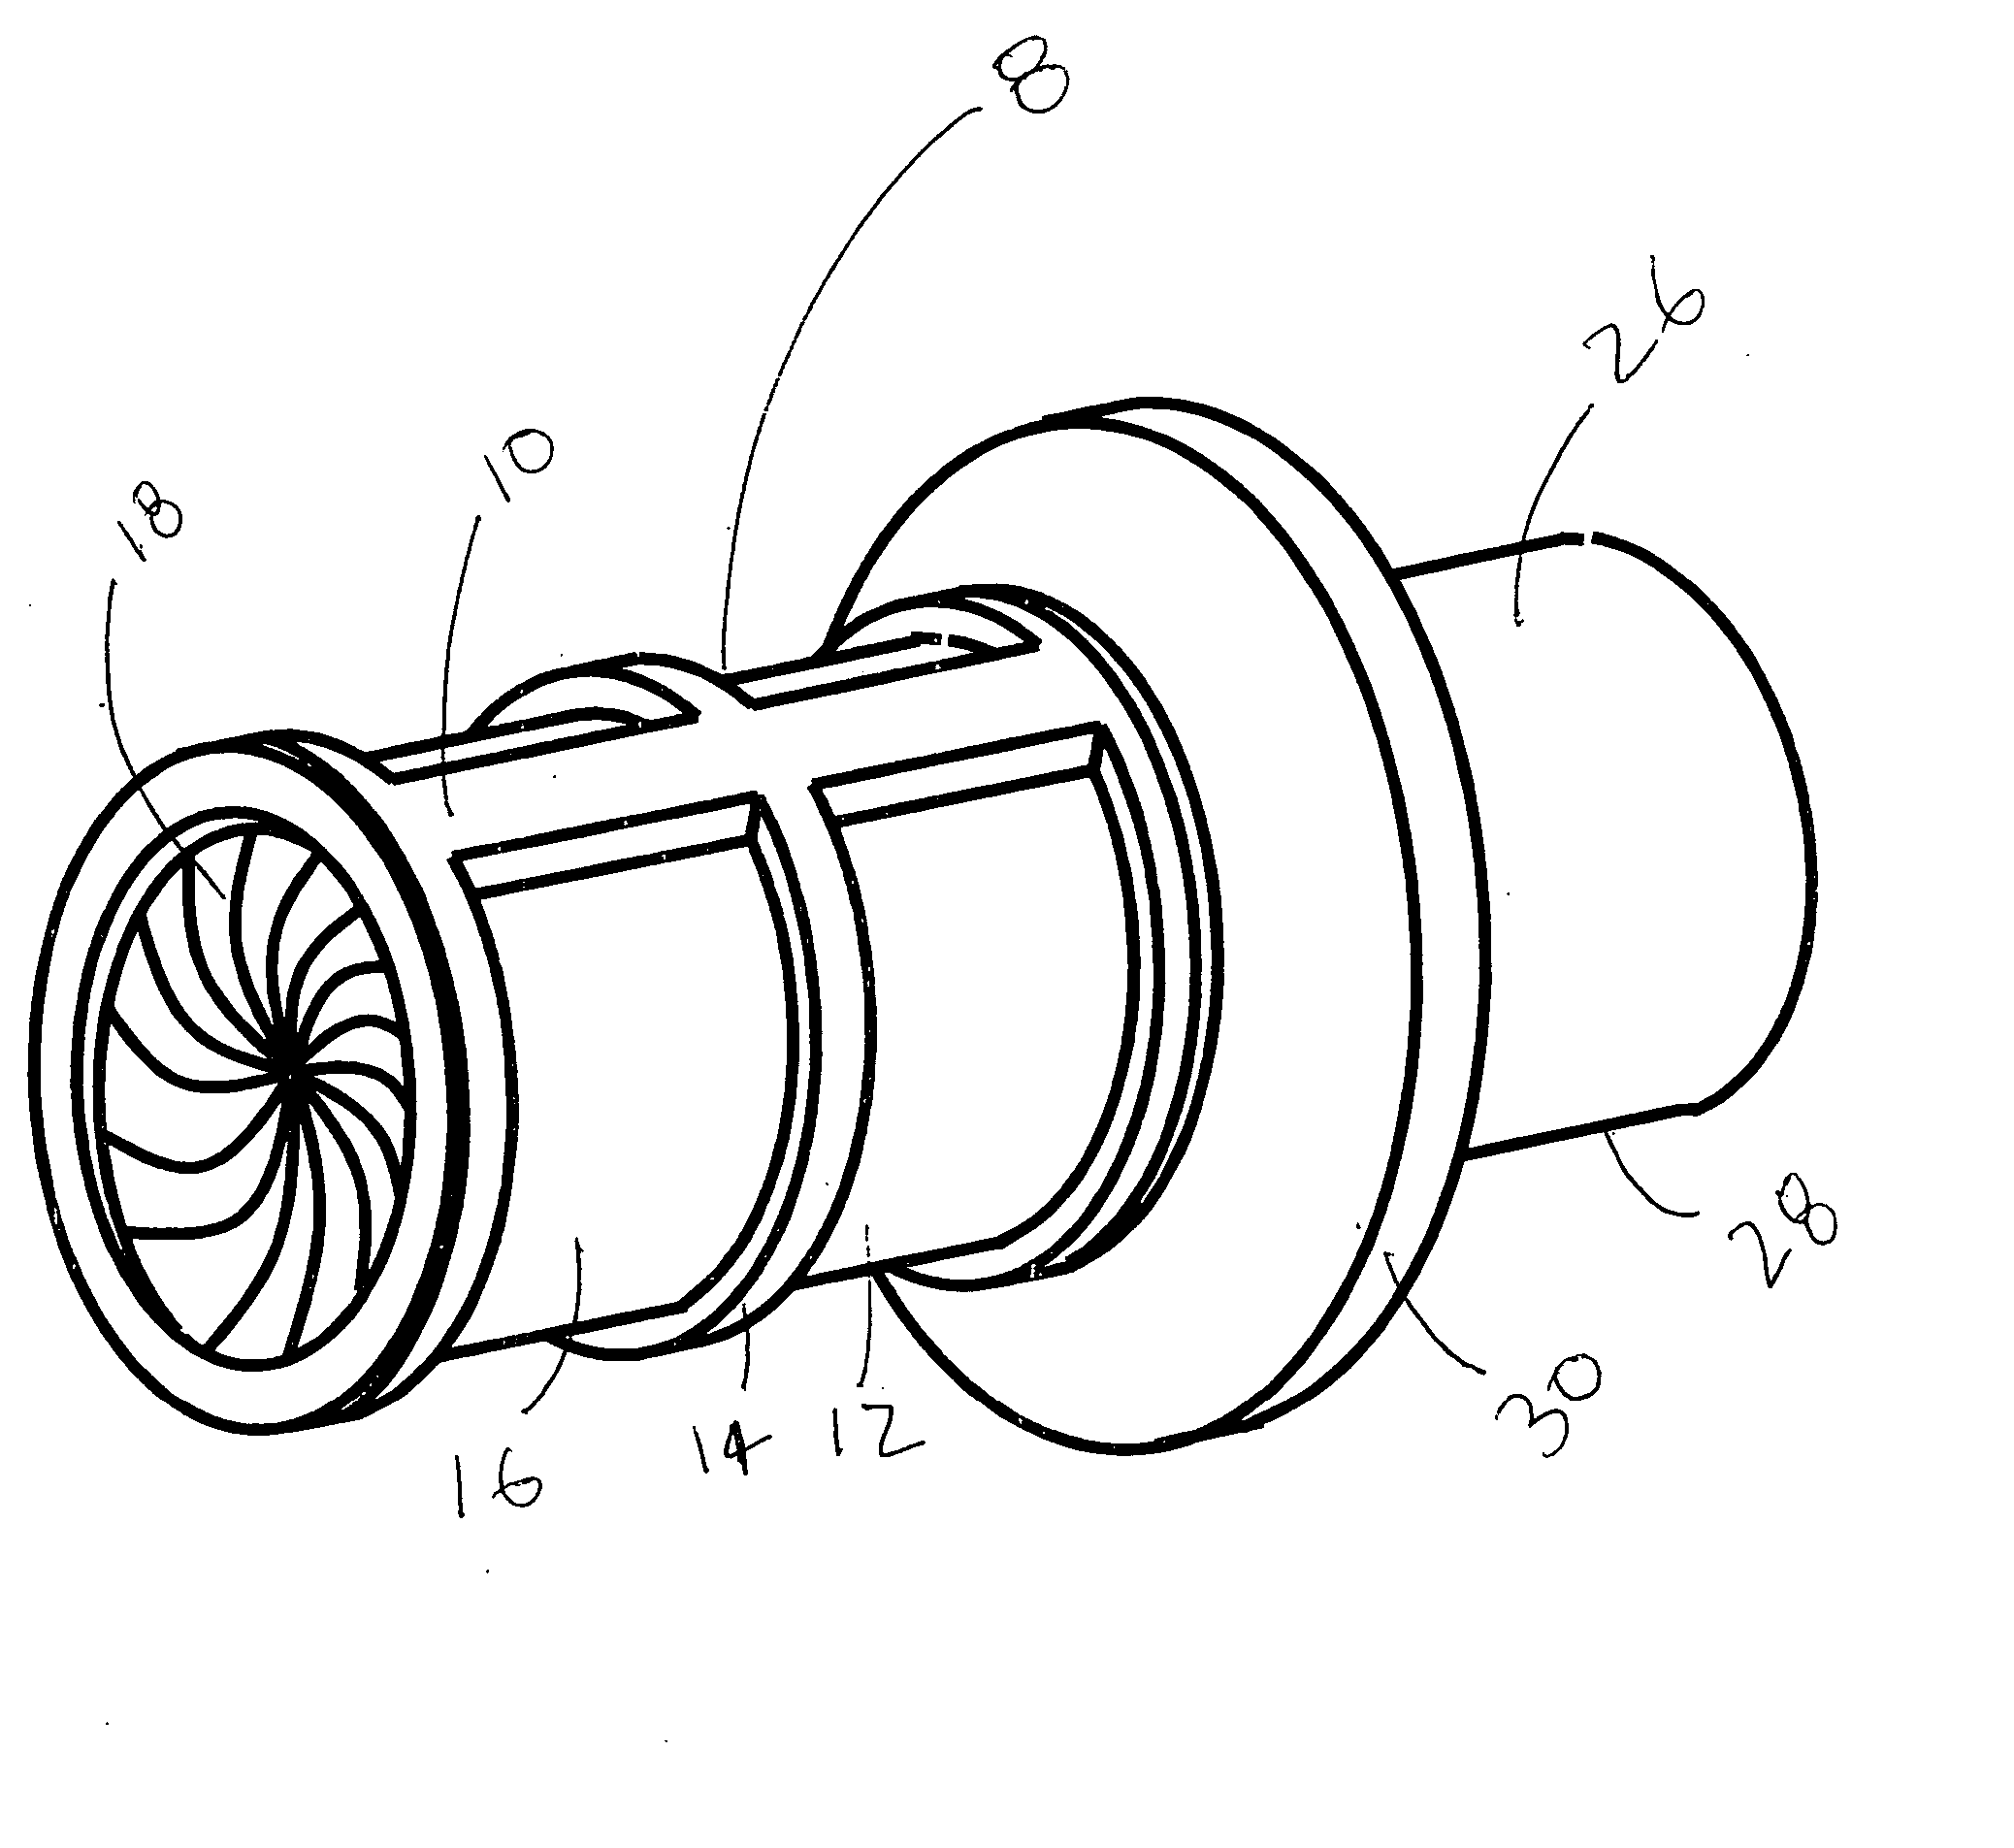 Anatomical cavity implant transport device and method